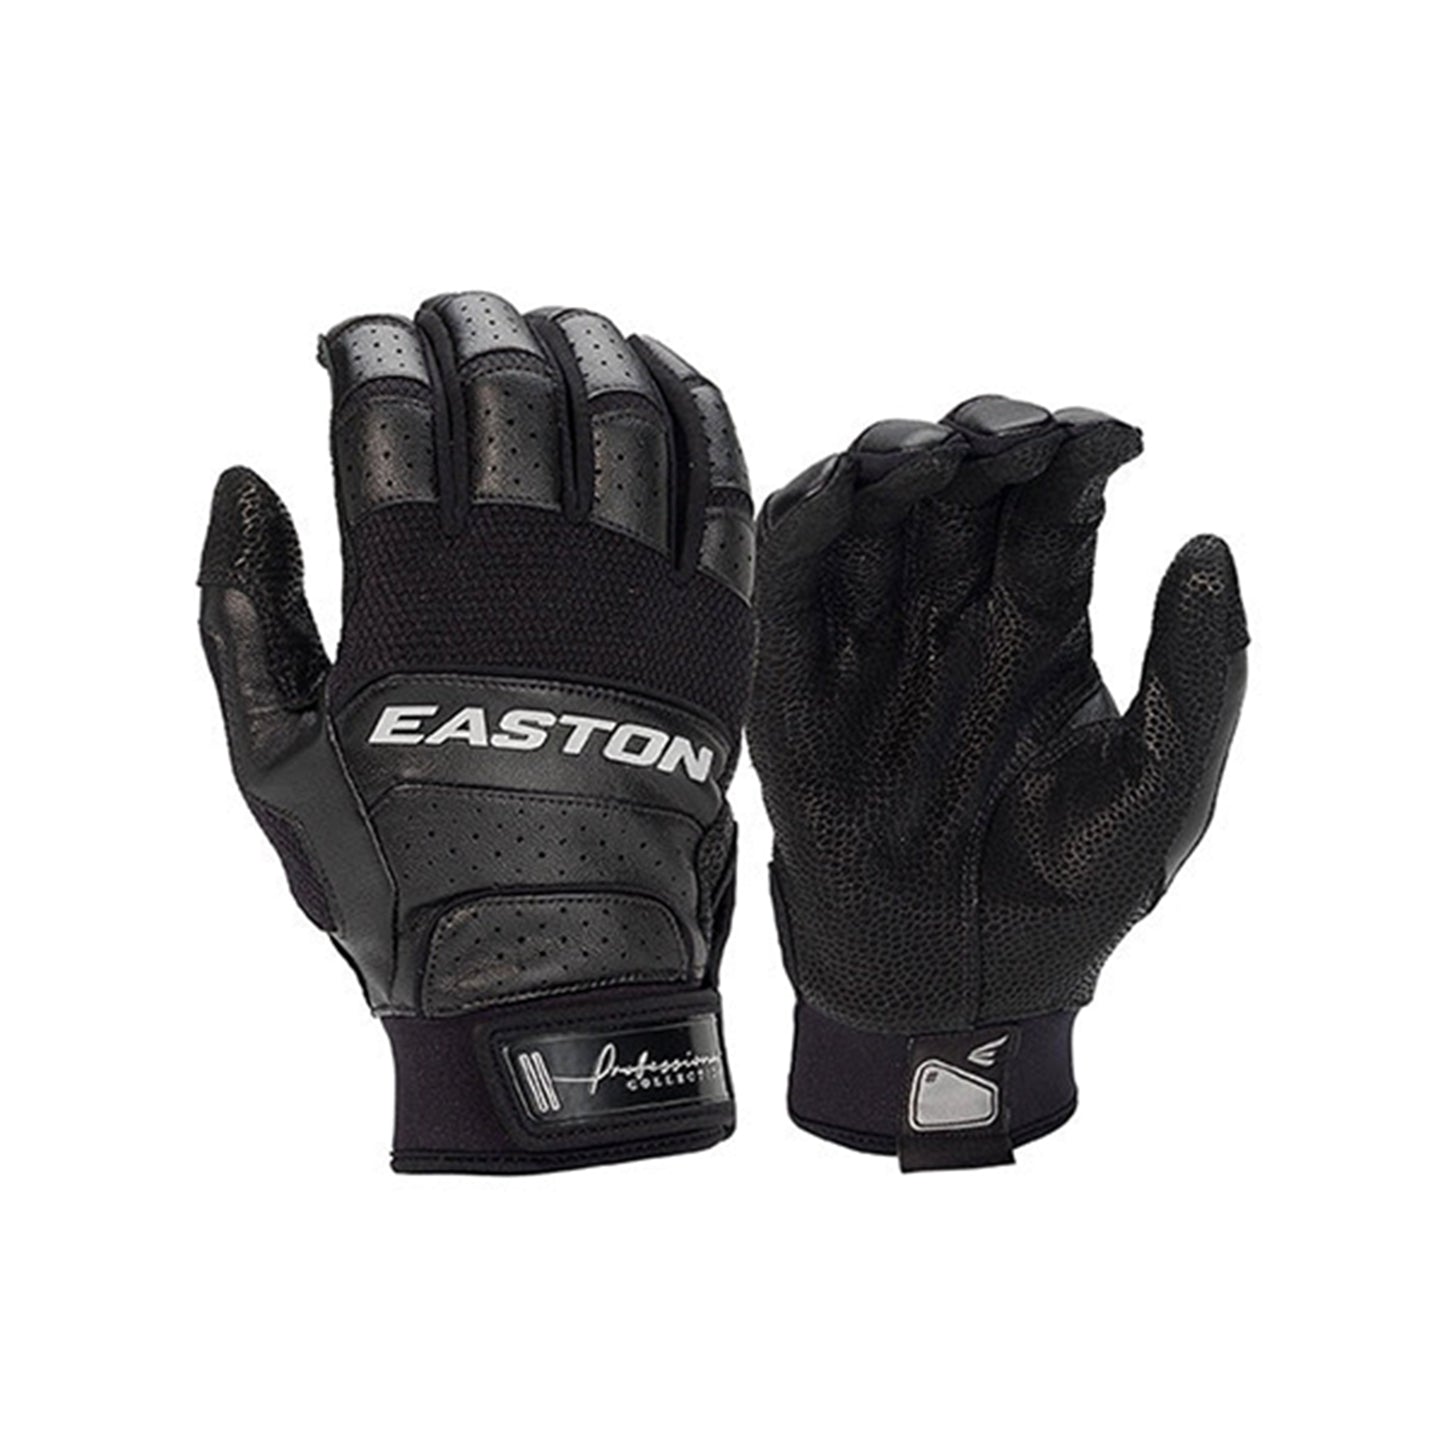 Easton Professional Collection Batting Gloves